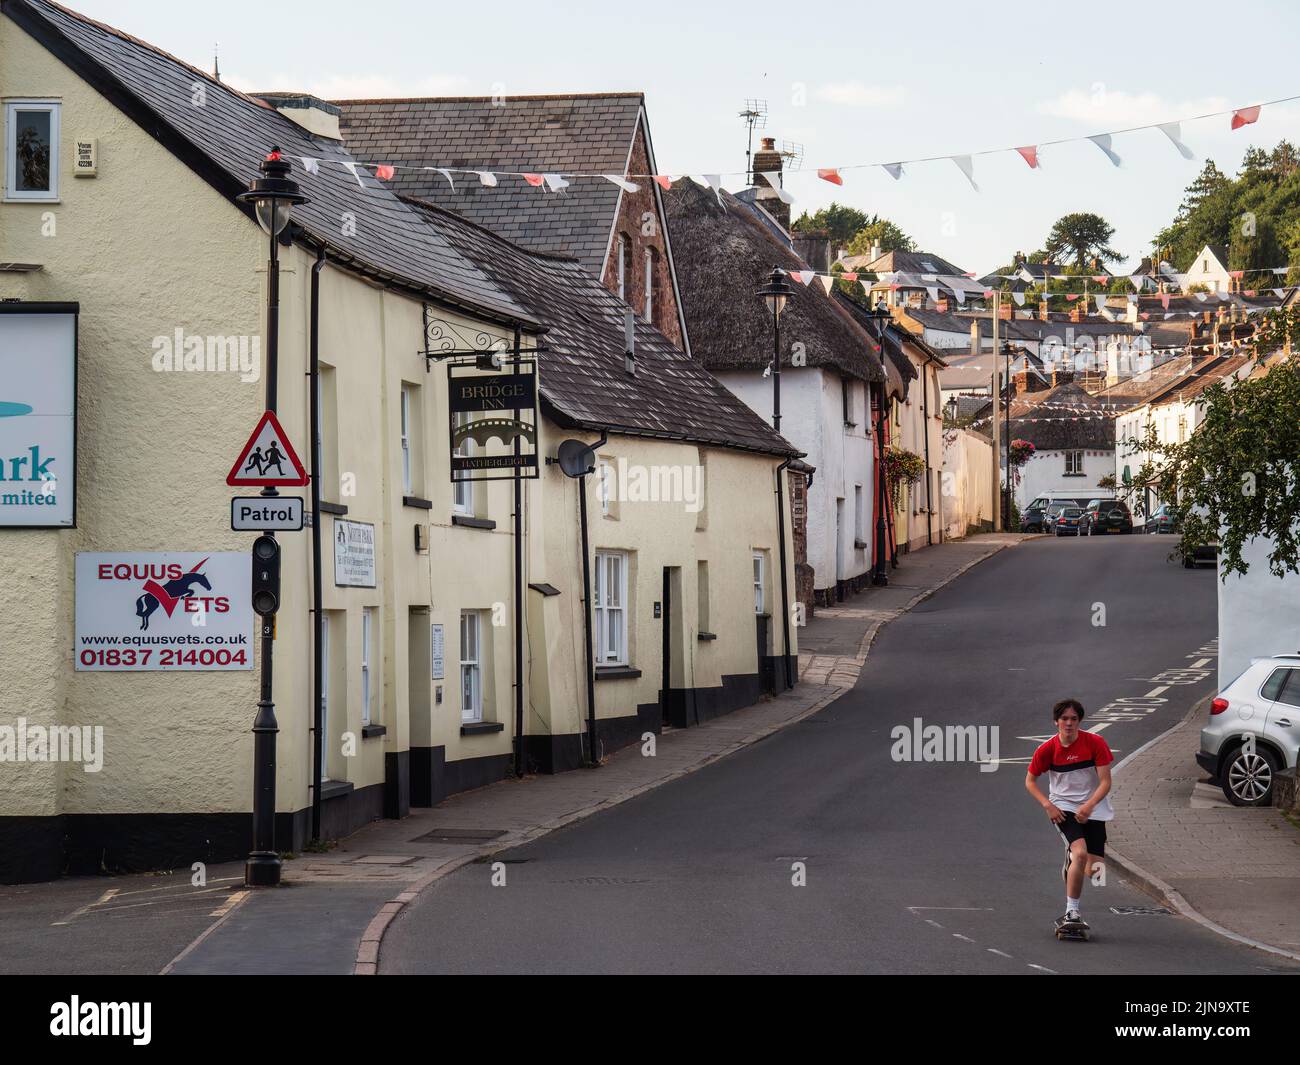 HATHERLEIGH, DEVON, ENGLAND - AUGUST 9 2022: View along Bridge St with cottages, bunting flags, and a young man on a skateboard, Stock Photo